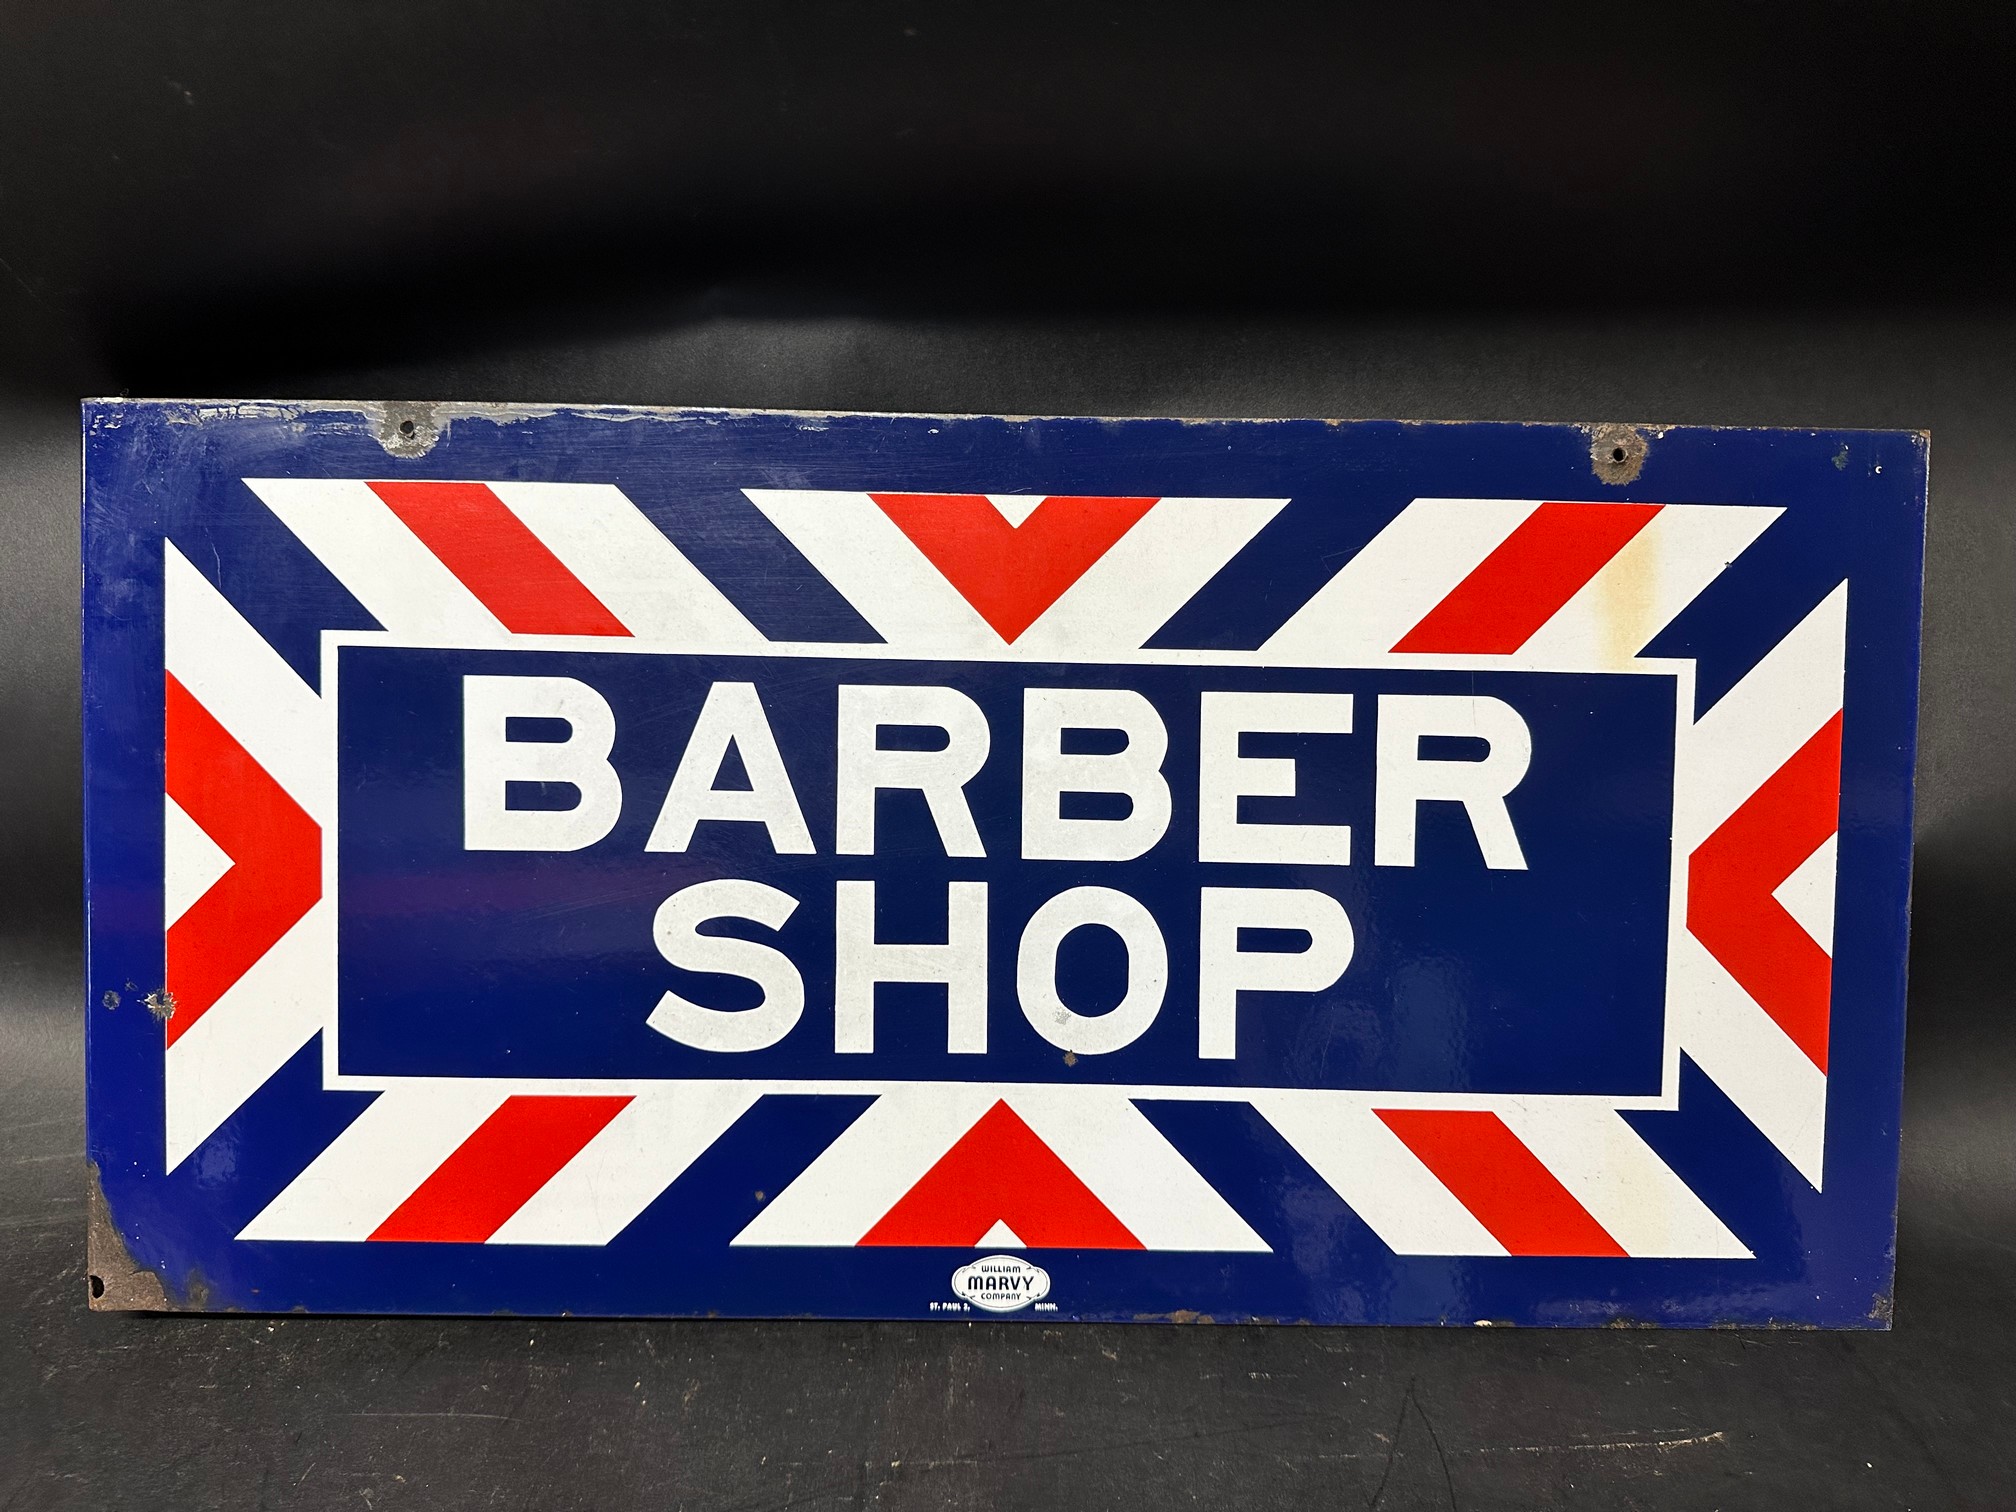 A Barber Shop double sided enamel sign with hanging flange by William Marvy Company, 24 x 12".